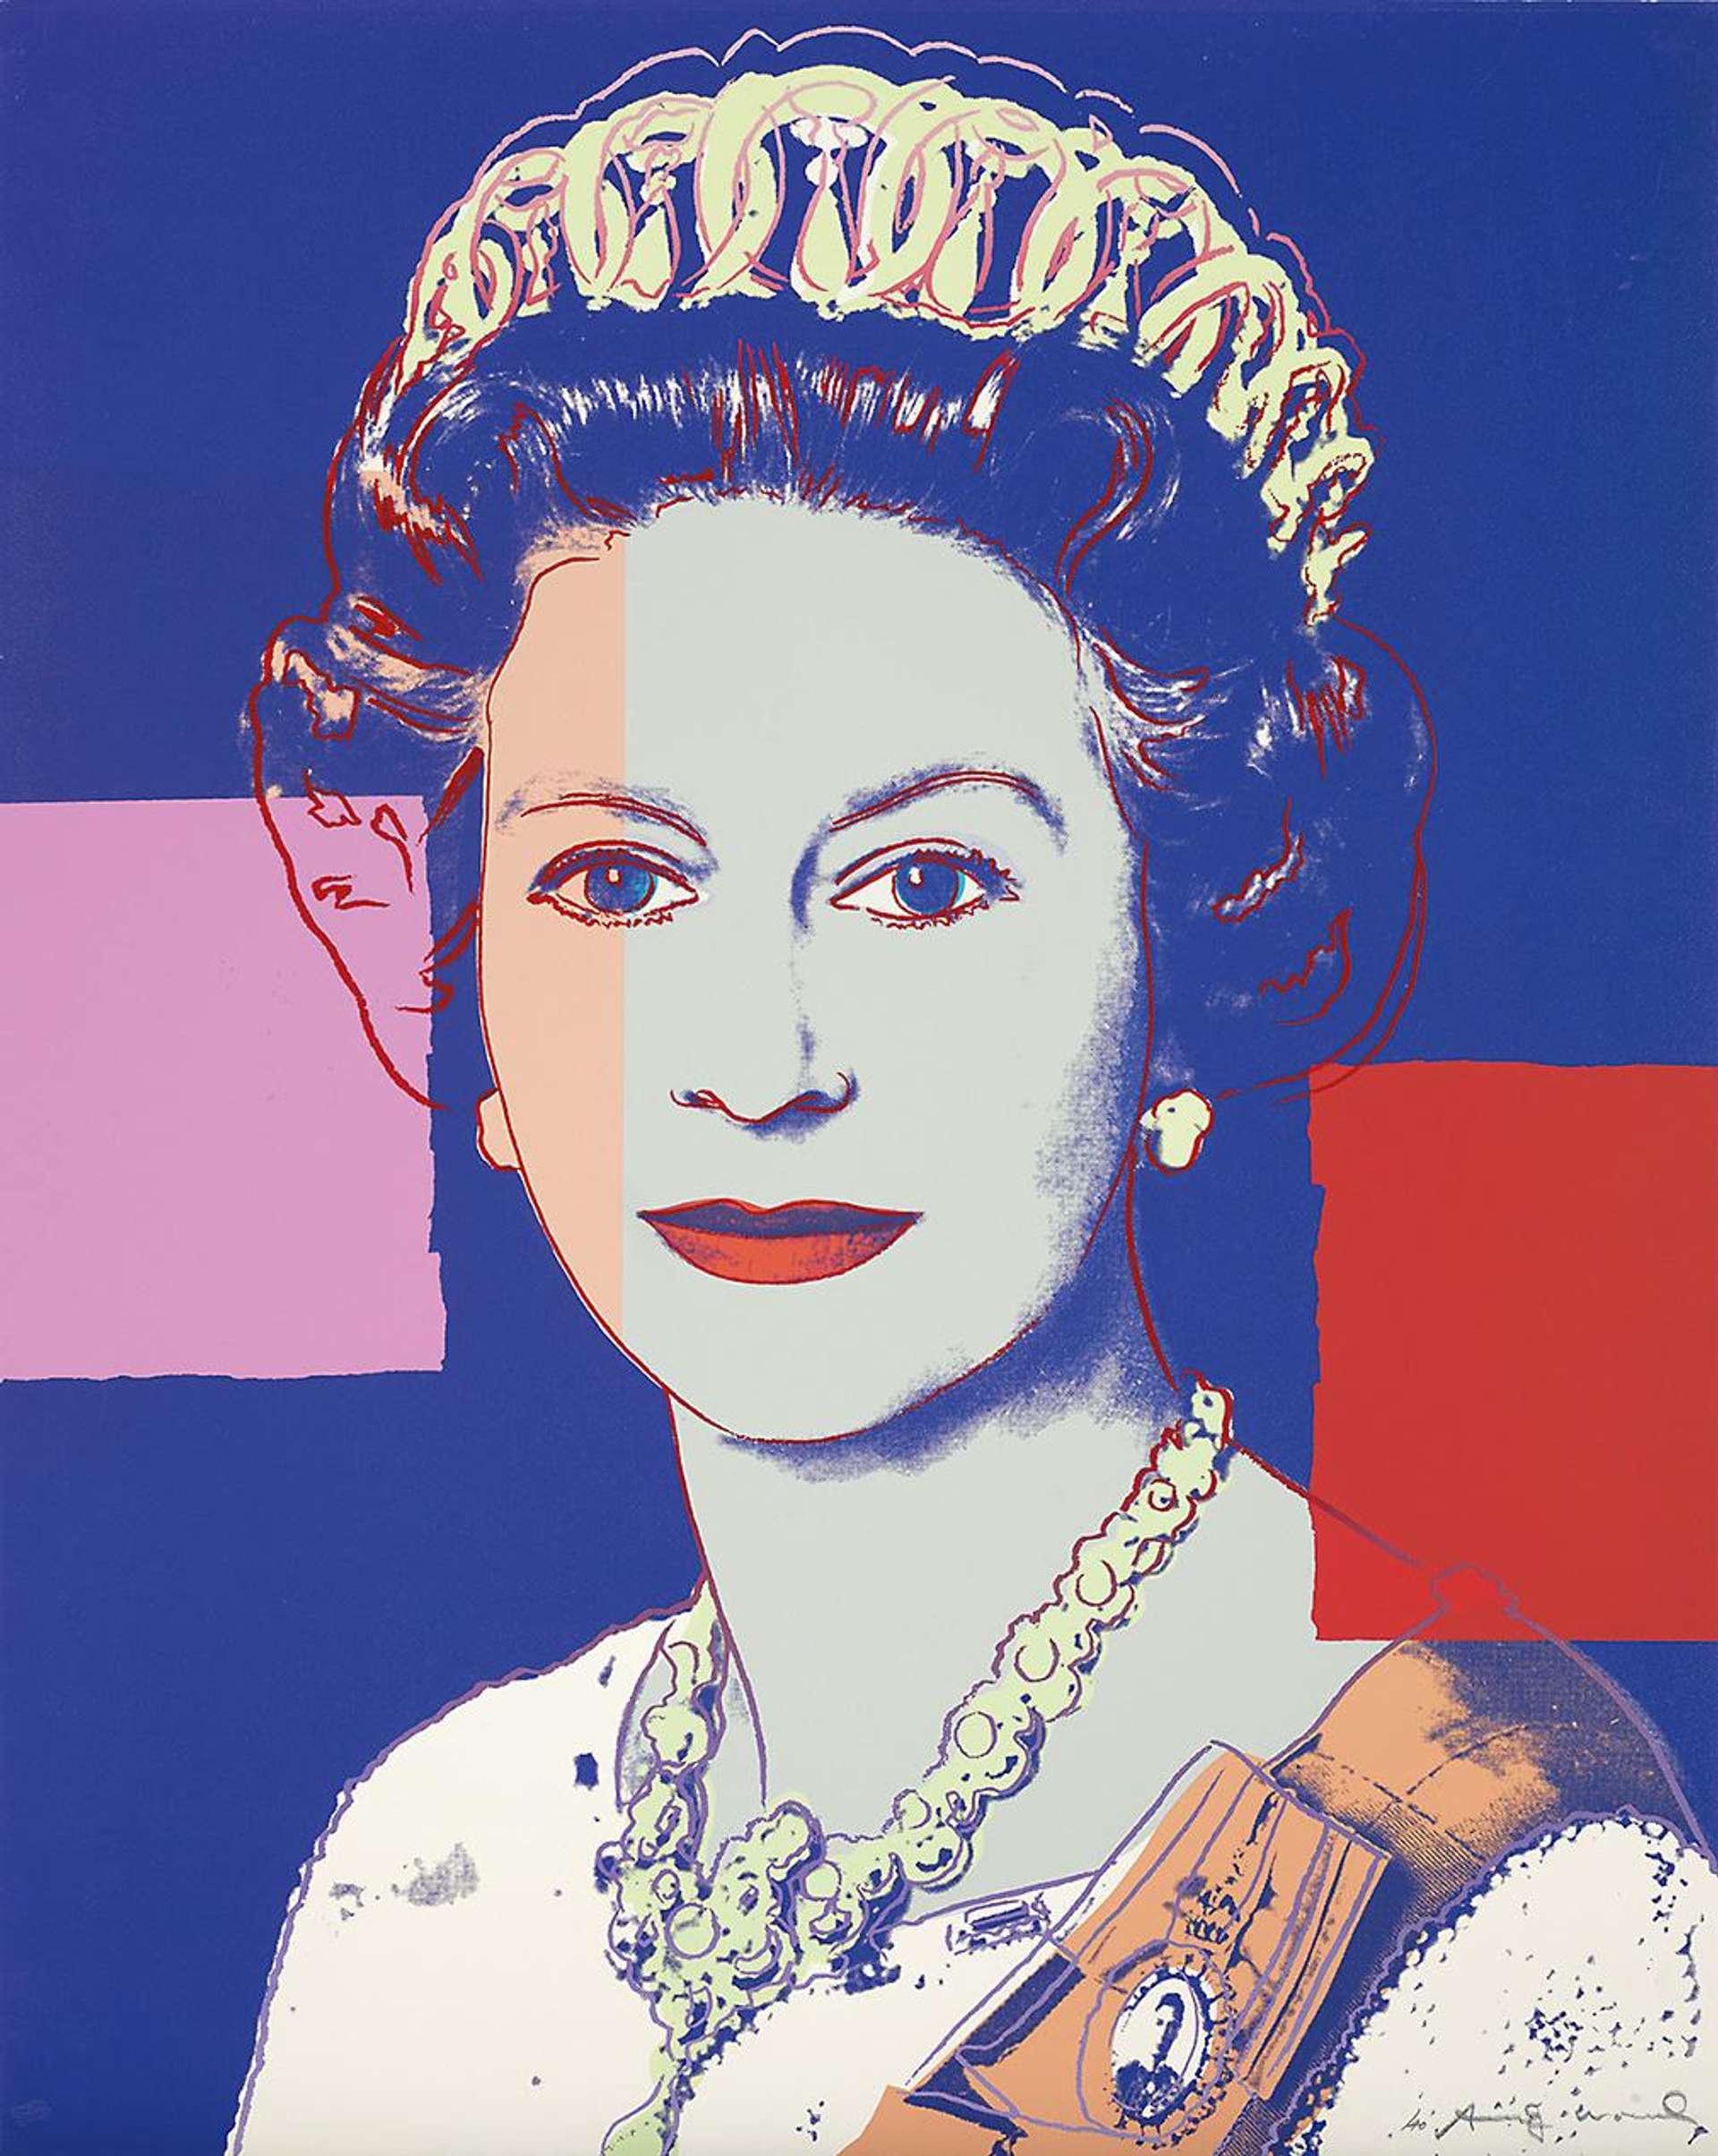 The royal portrait of Queen Elizabeth II appears at the centre of the composition. The Queen is adorned in her crown and other royal jewels, with her features accentuated by graphic outlines. The background is blue, with two collaged squares in red and pink reaching towards the Queen's portrait.